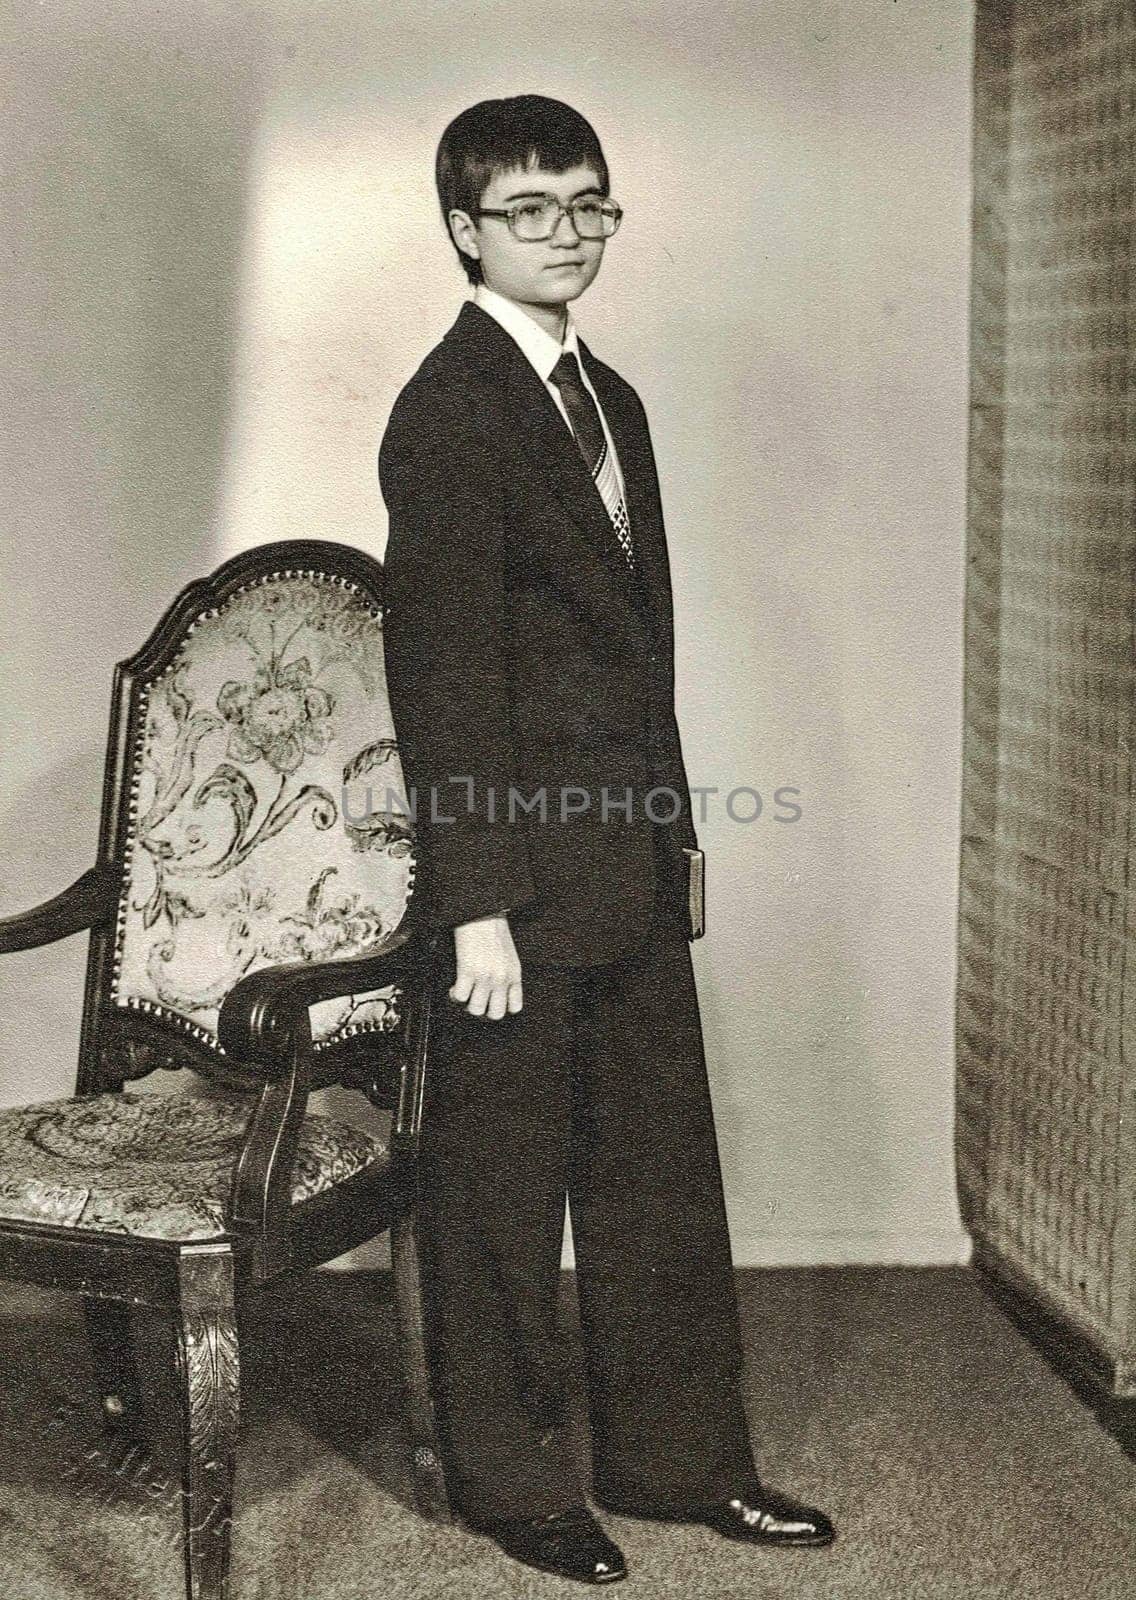 ZWICKAU, EAST GERMANY - CIRCA 1970s: The retro photo shows young boy,circa 15 years old. Studio photo. Black and white photo.